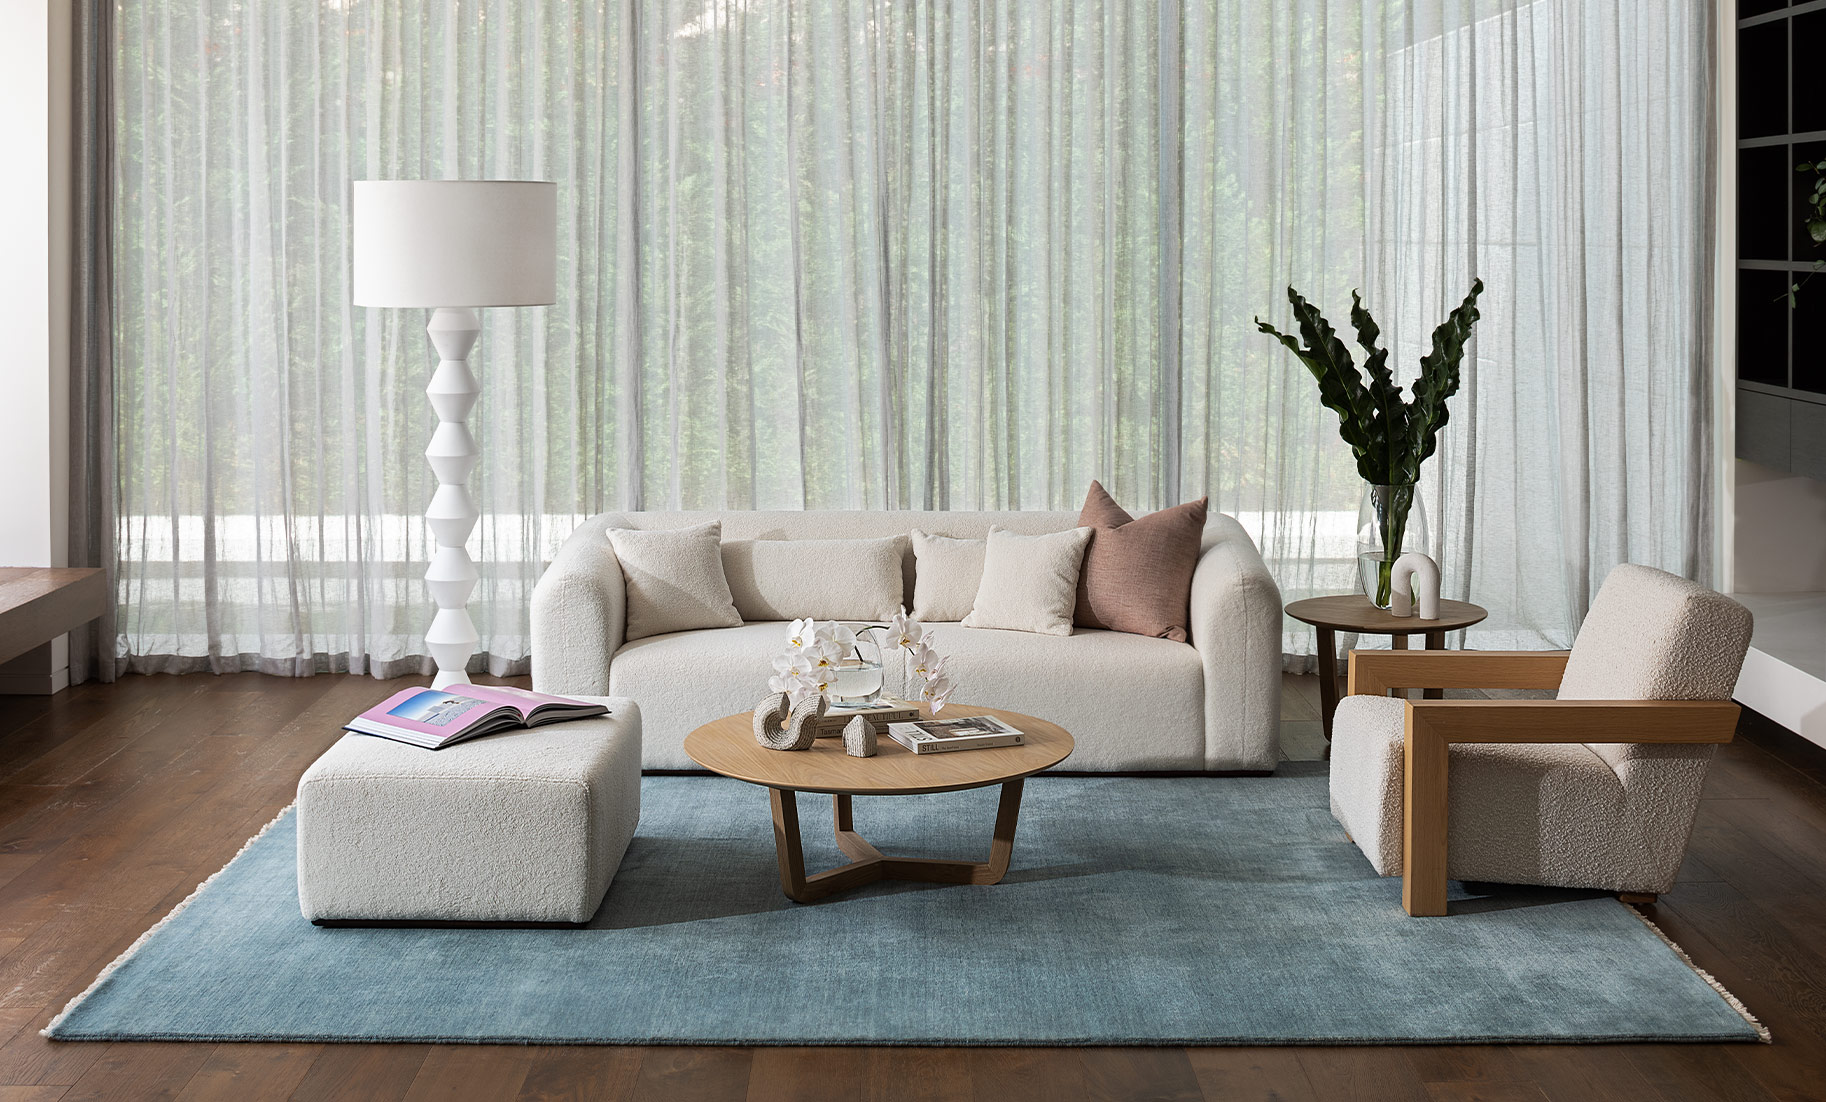 Insitu featuring diva sky blue, Mitchell sofa and ottoman by The Rug Collection